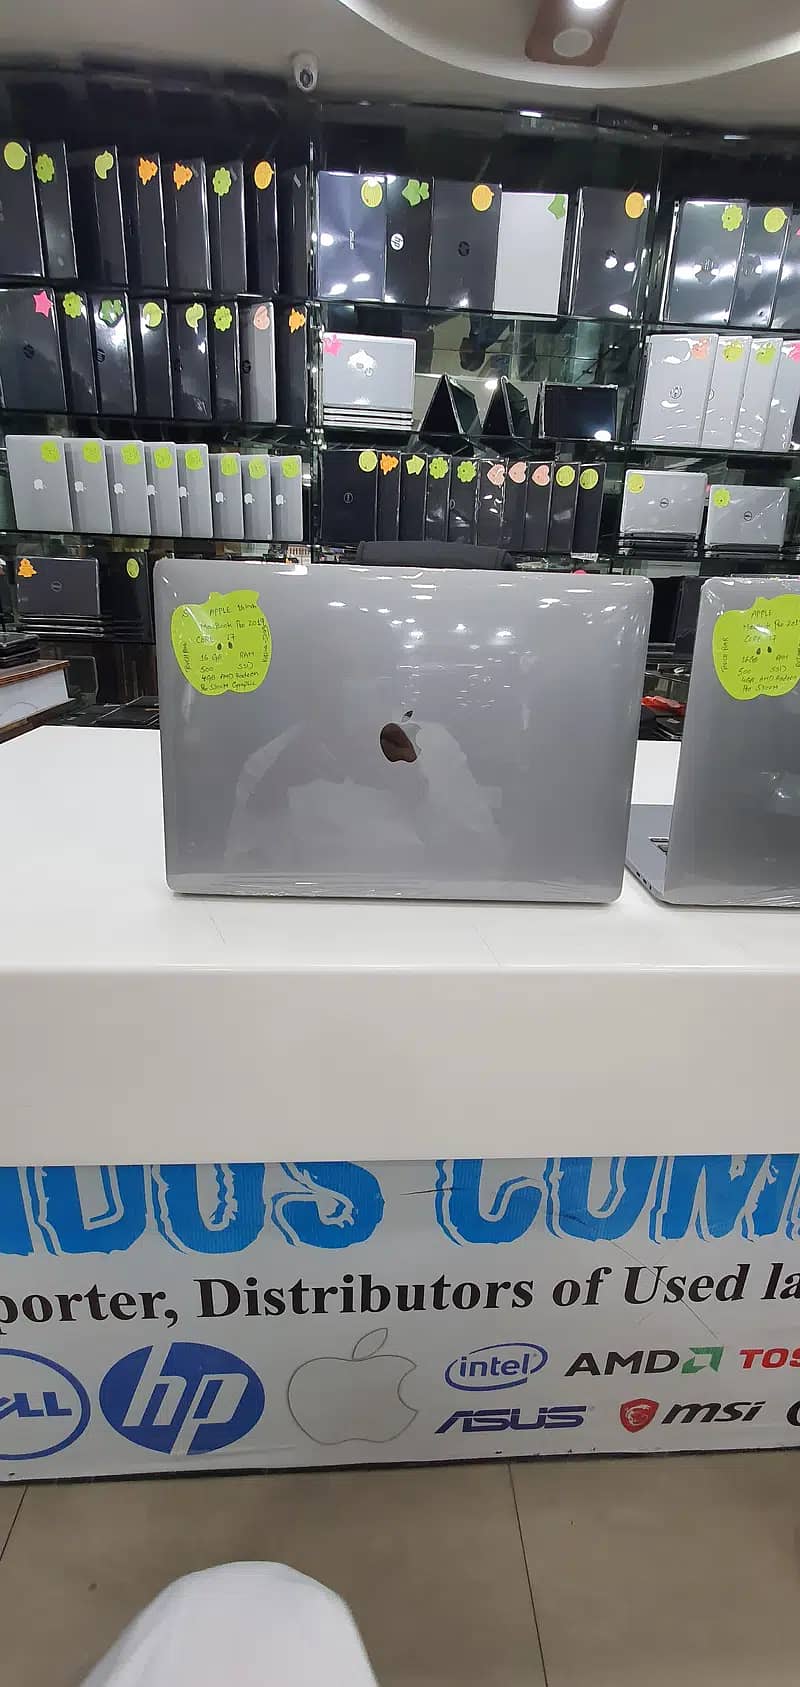 Macbook Pro 2019 16'inches with Retina Display Touchbar for sale 12